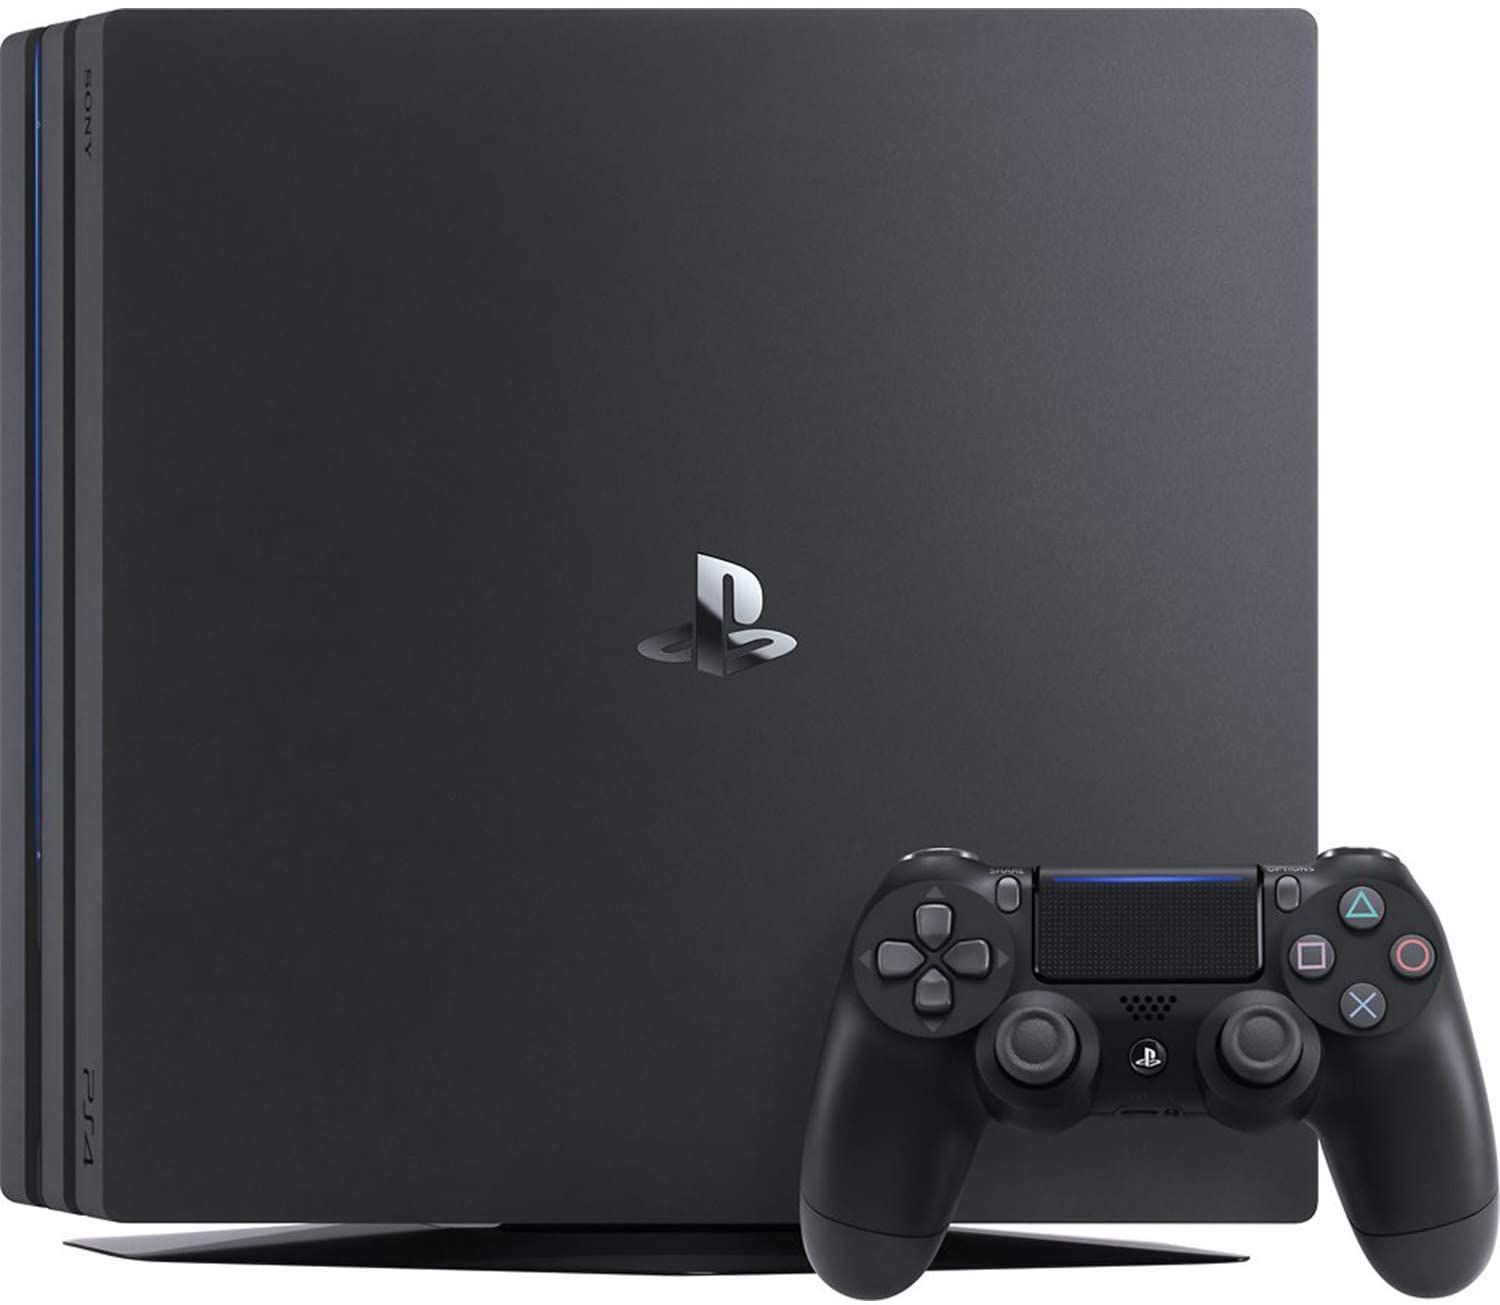 Top of PlayStation 4 Pro on side, next to Dualshock 4 controller